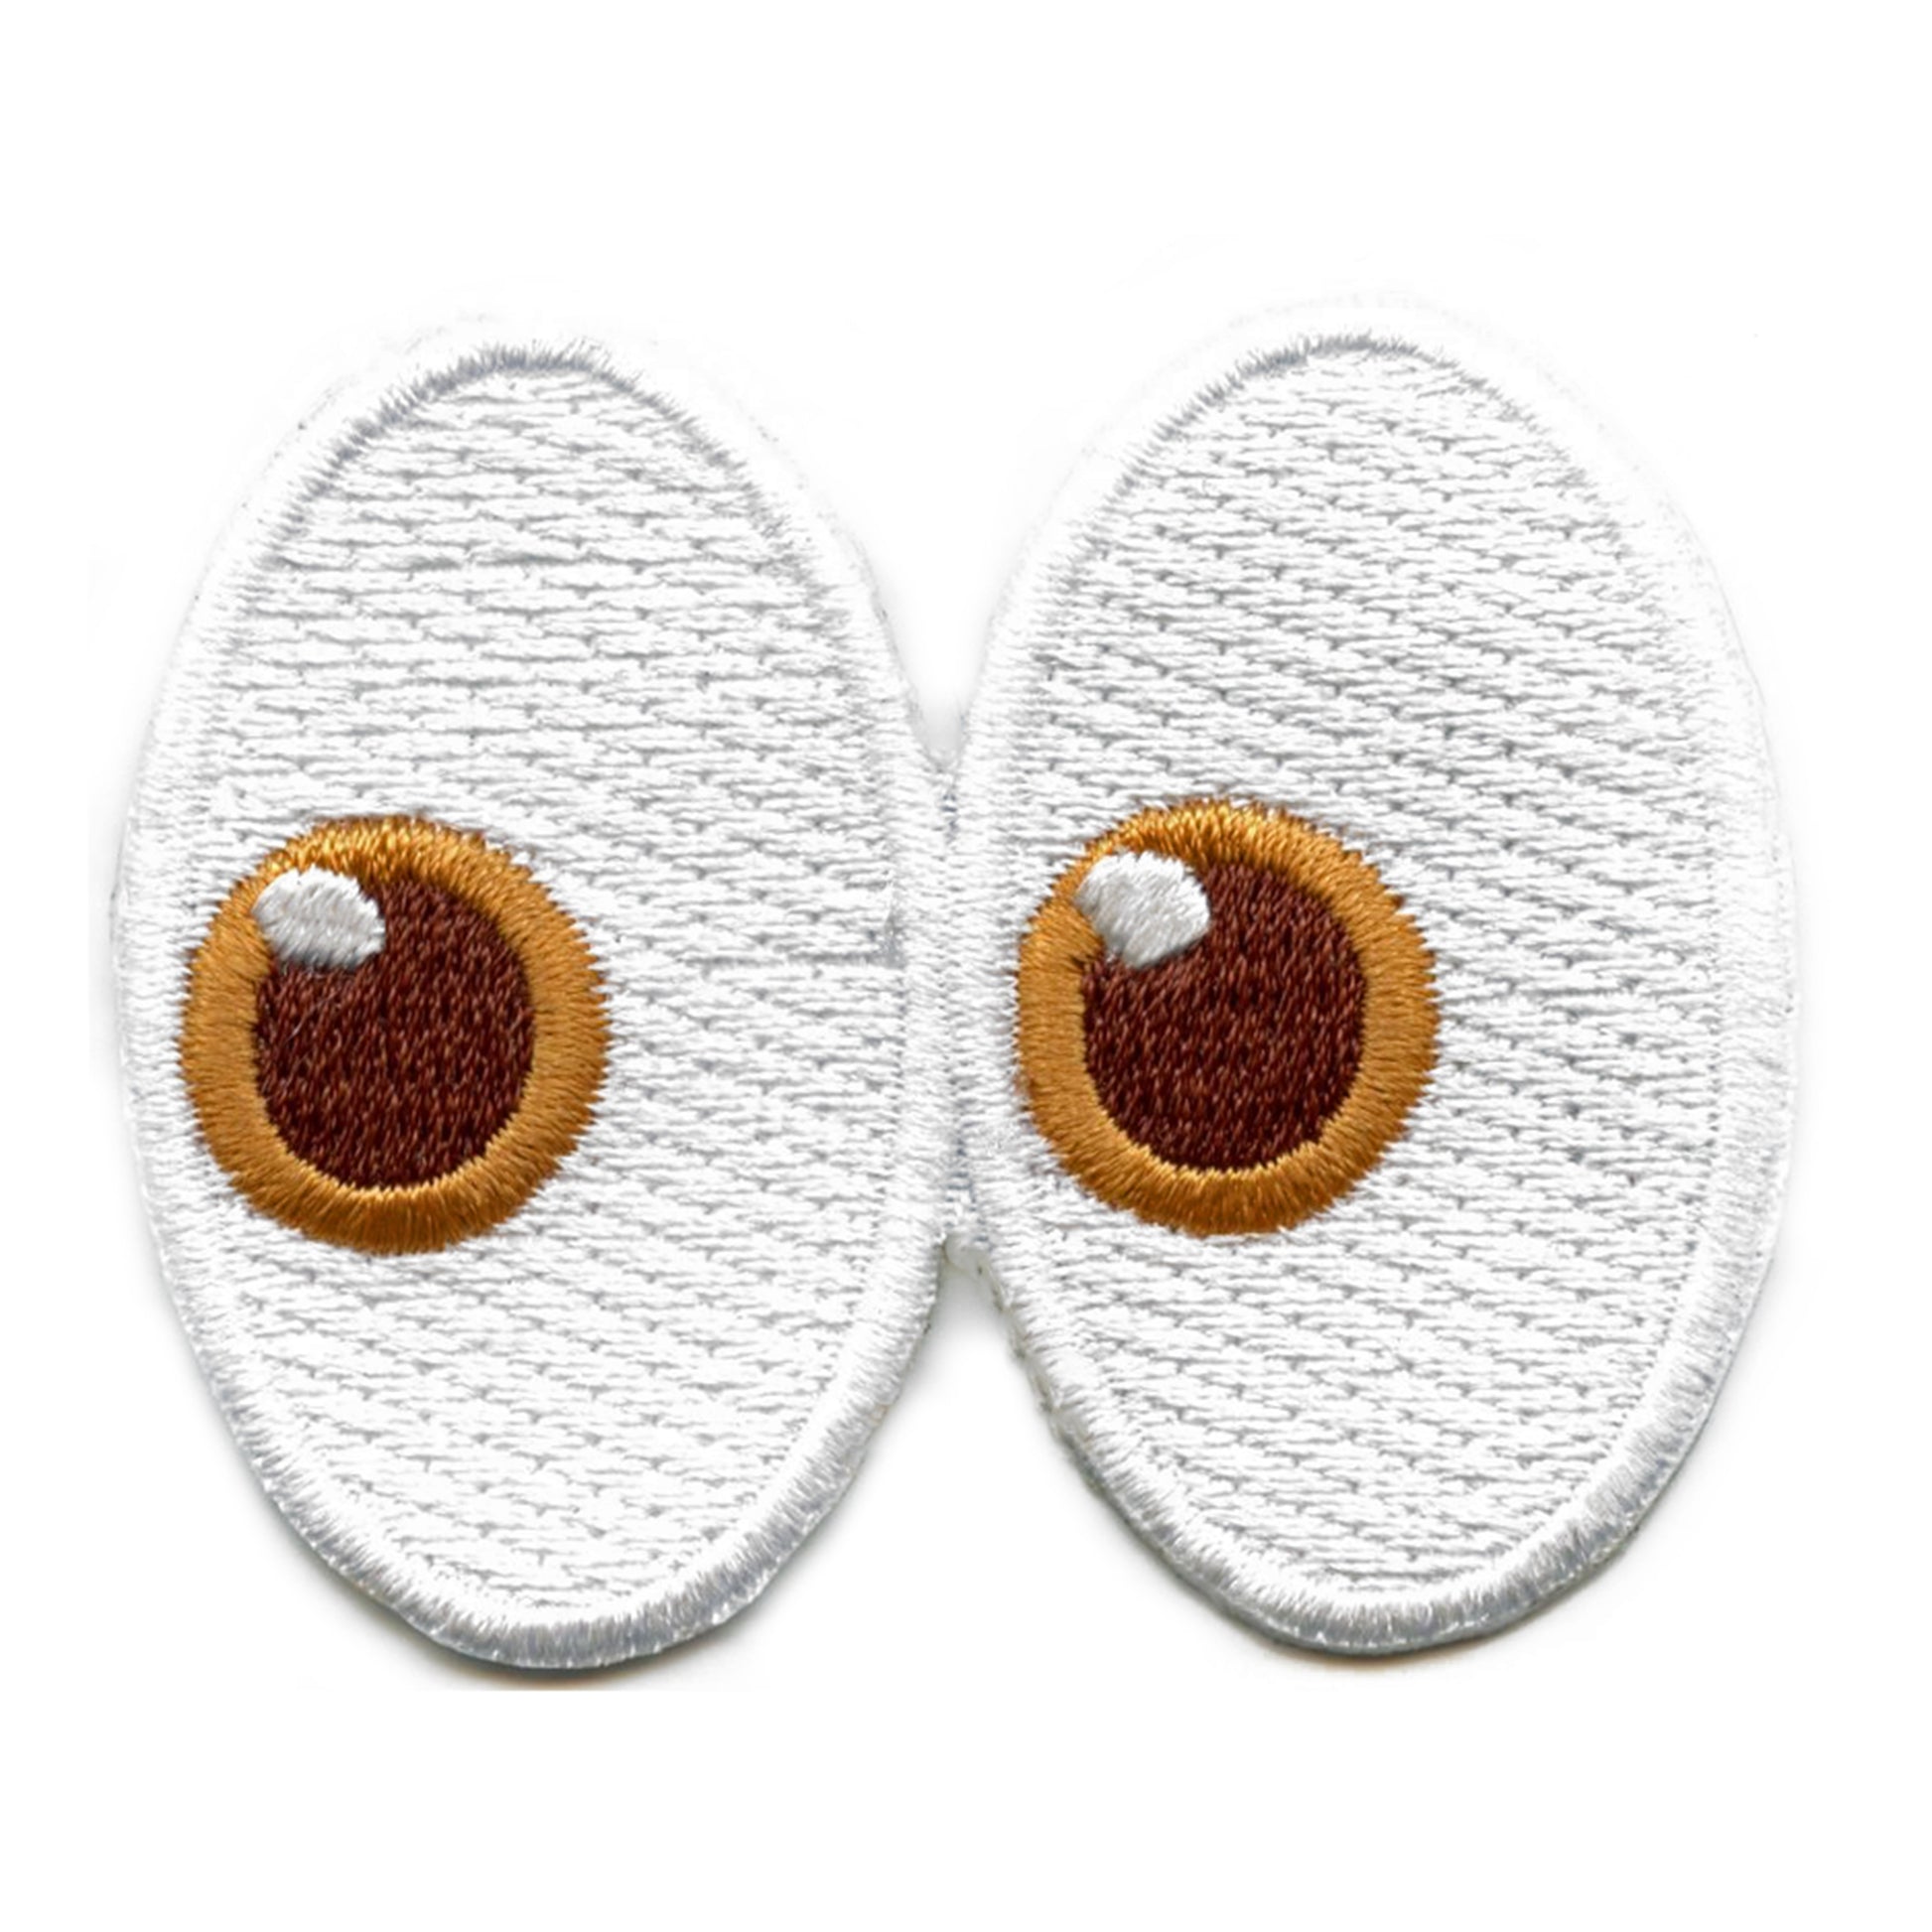 Side Looking Eyes Emoji Iron On Embroidered Patch 